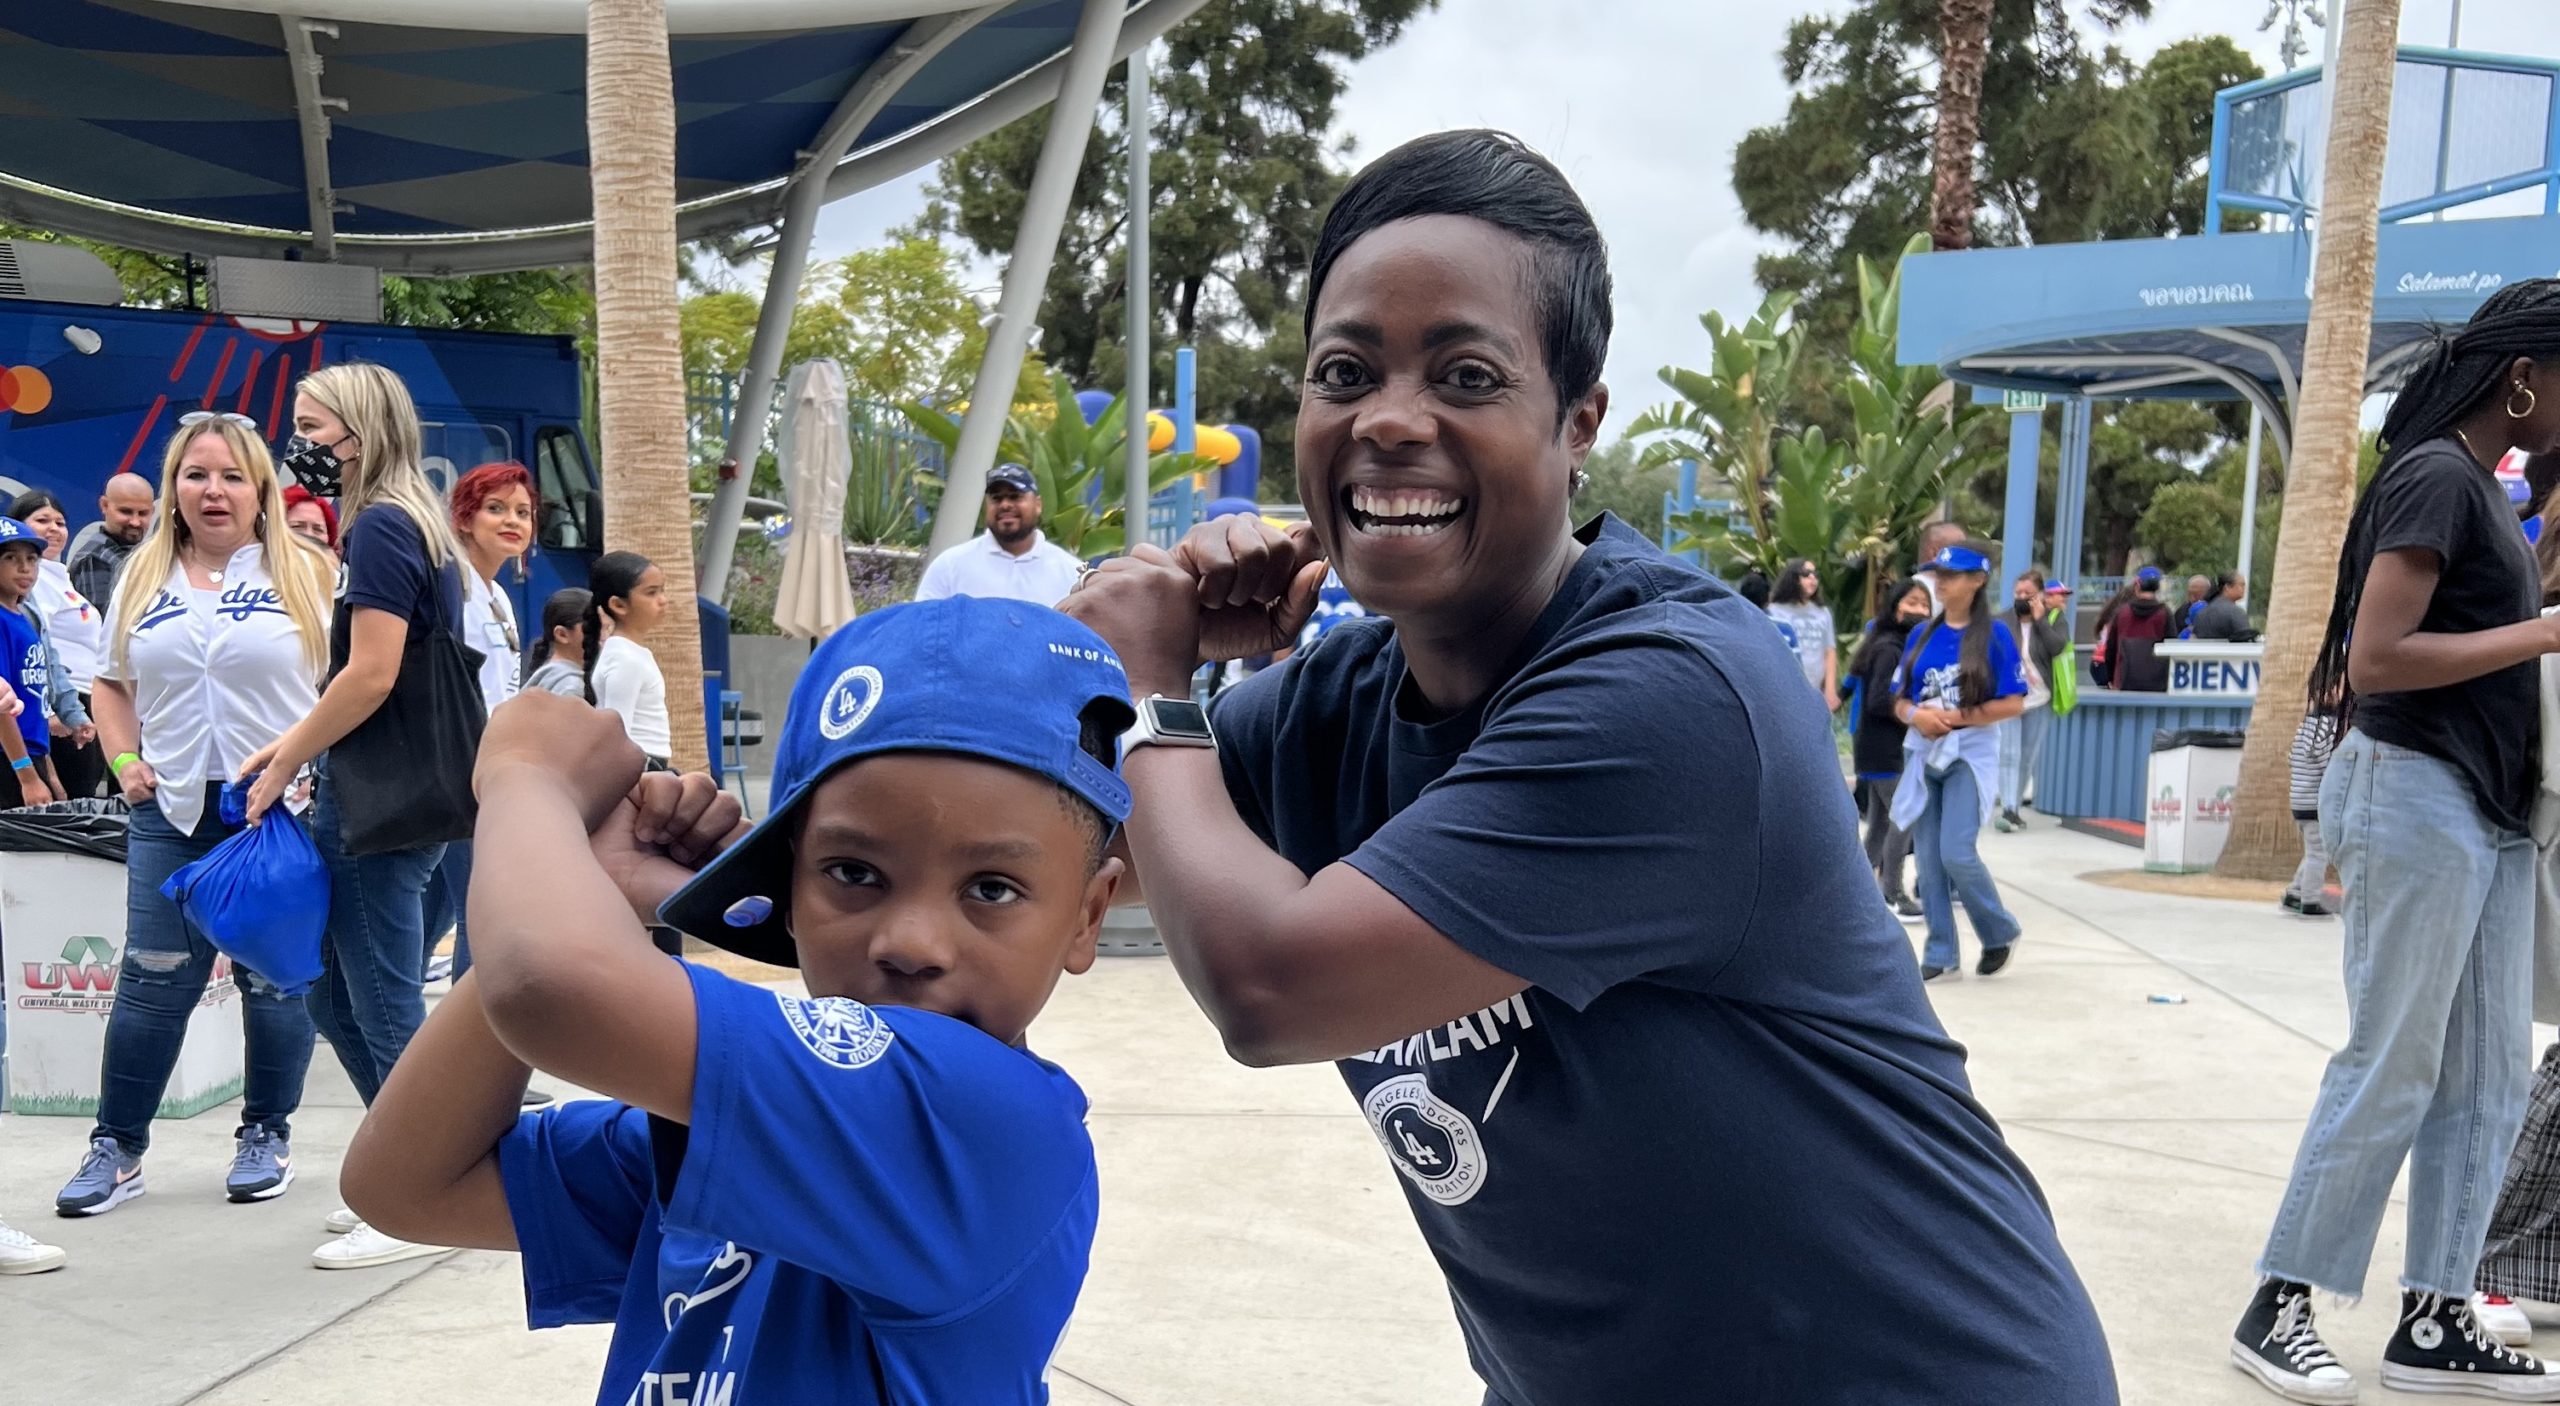 Chief Executive Officer of The Los Angeles Dodgers Foundation, Nichol Whiteman